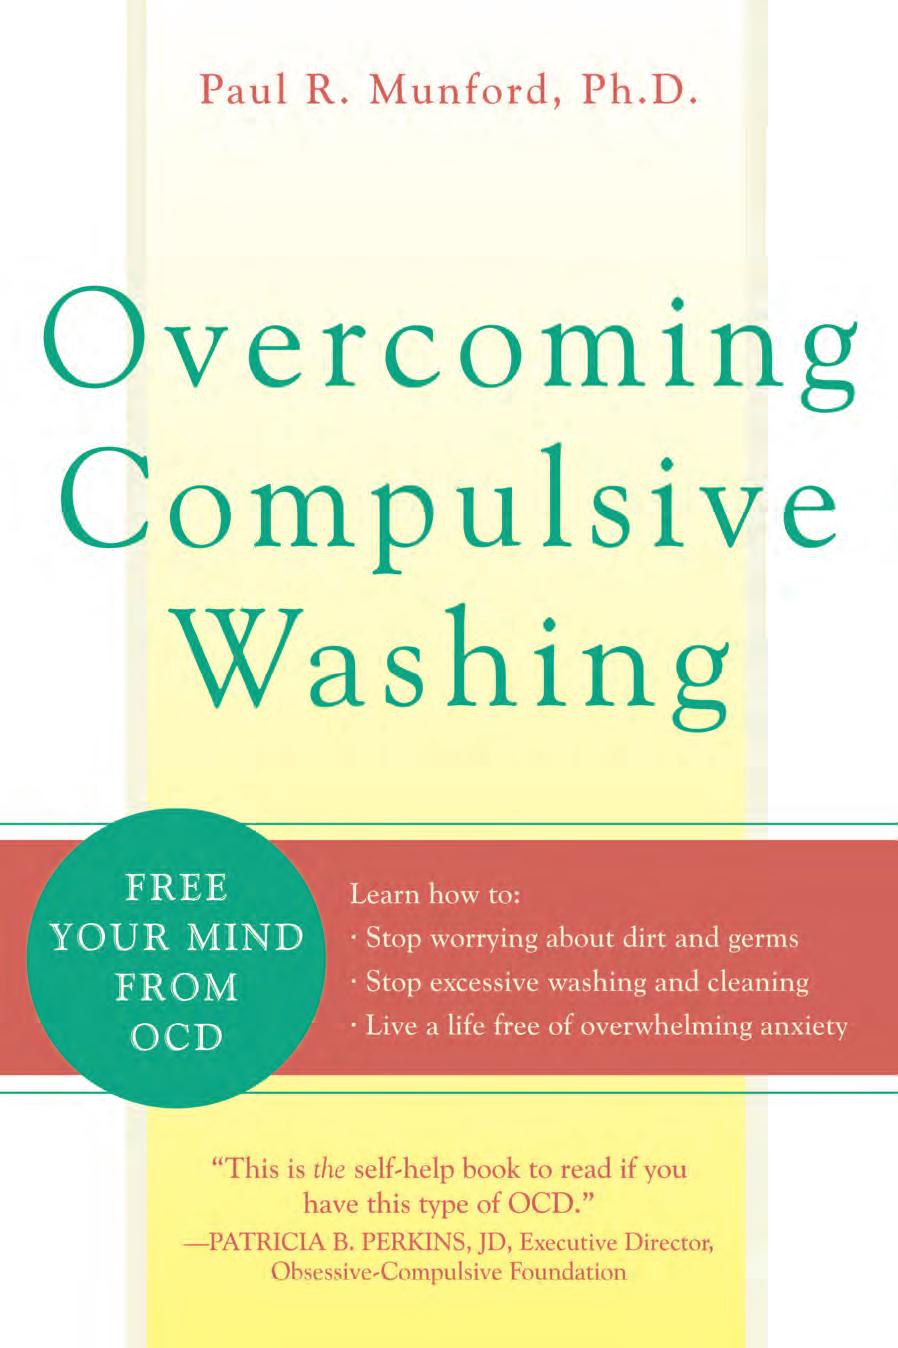 Overcoming Compulsive Washing: Free Your Mind from OCD by Paul R. Munford PhD